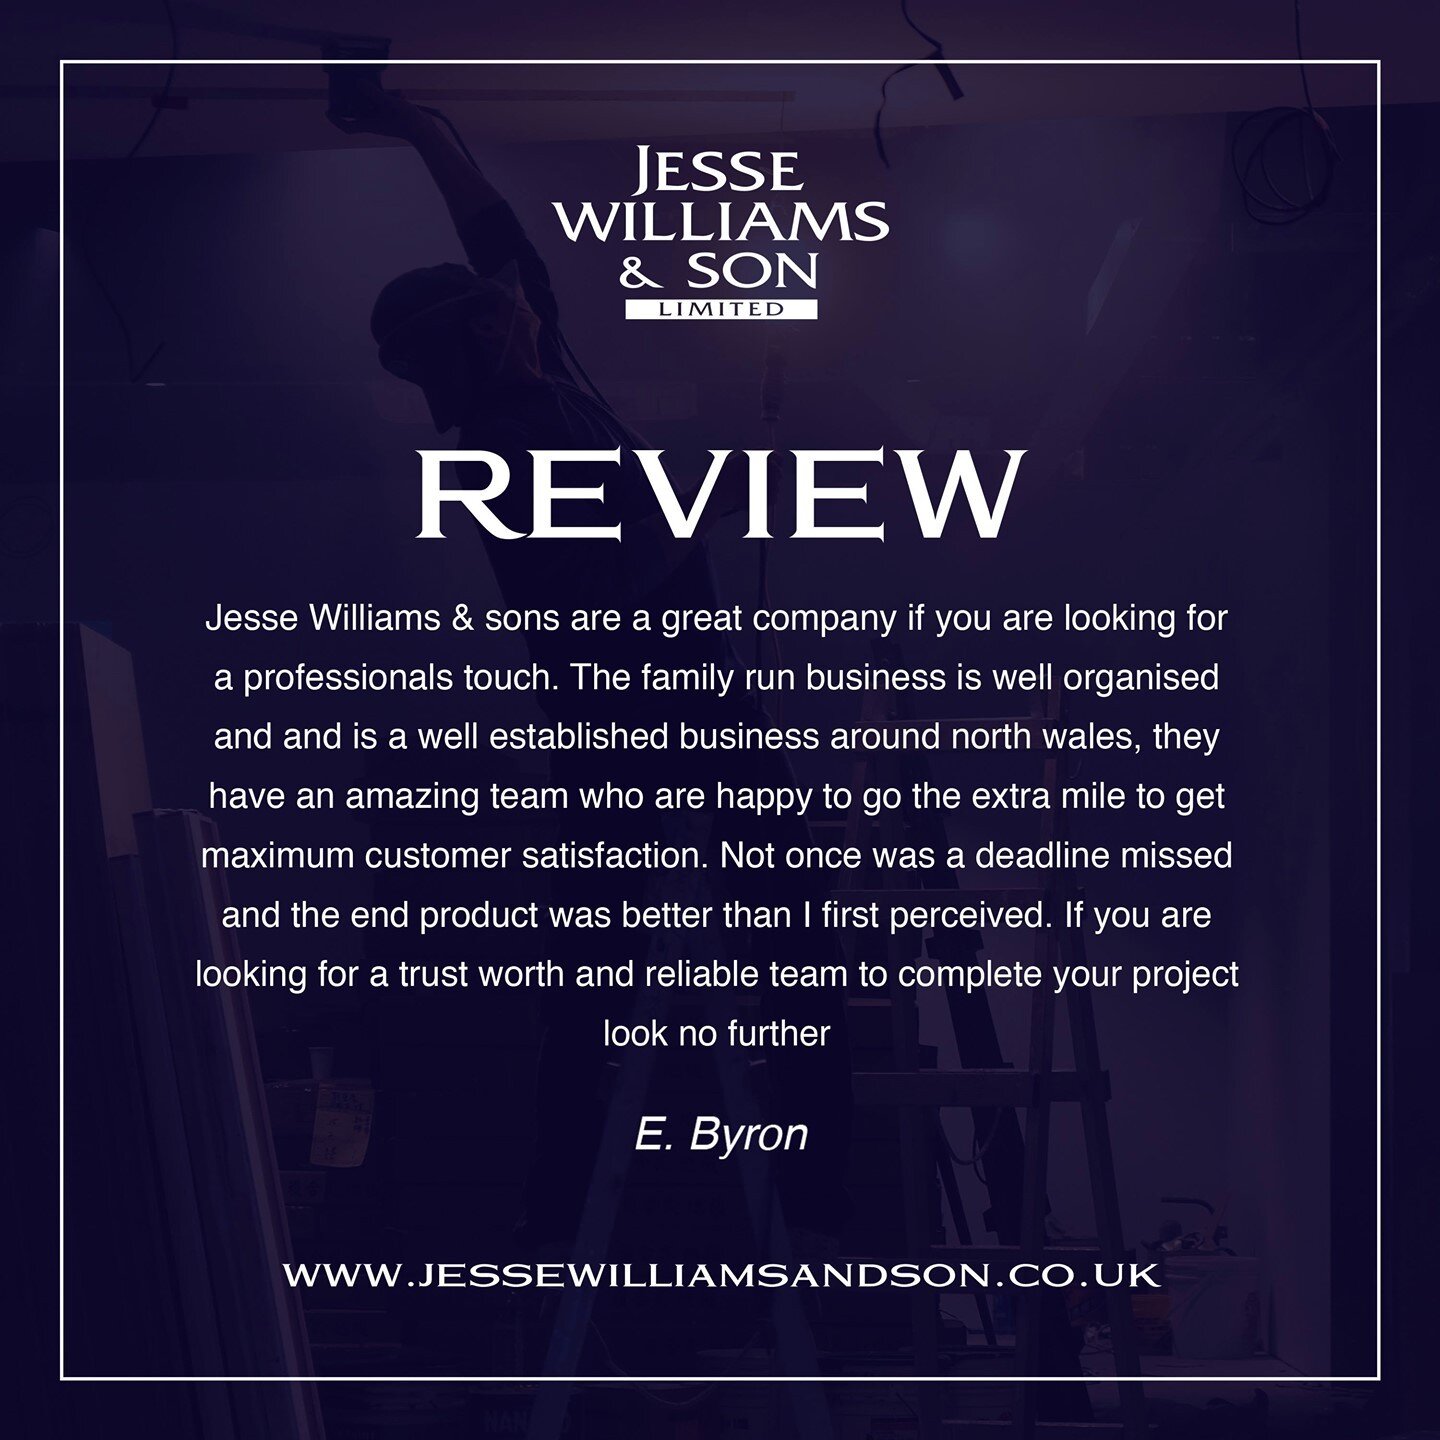 Another amazing review from a very happy customer! We take all of our feedback on board to make sure we give the best service we can at all times! 💙⠀
⠀
⠀
#northwales #localbusiness #construction #reviews #homerenovation #homesweethome #homereno #pro